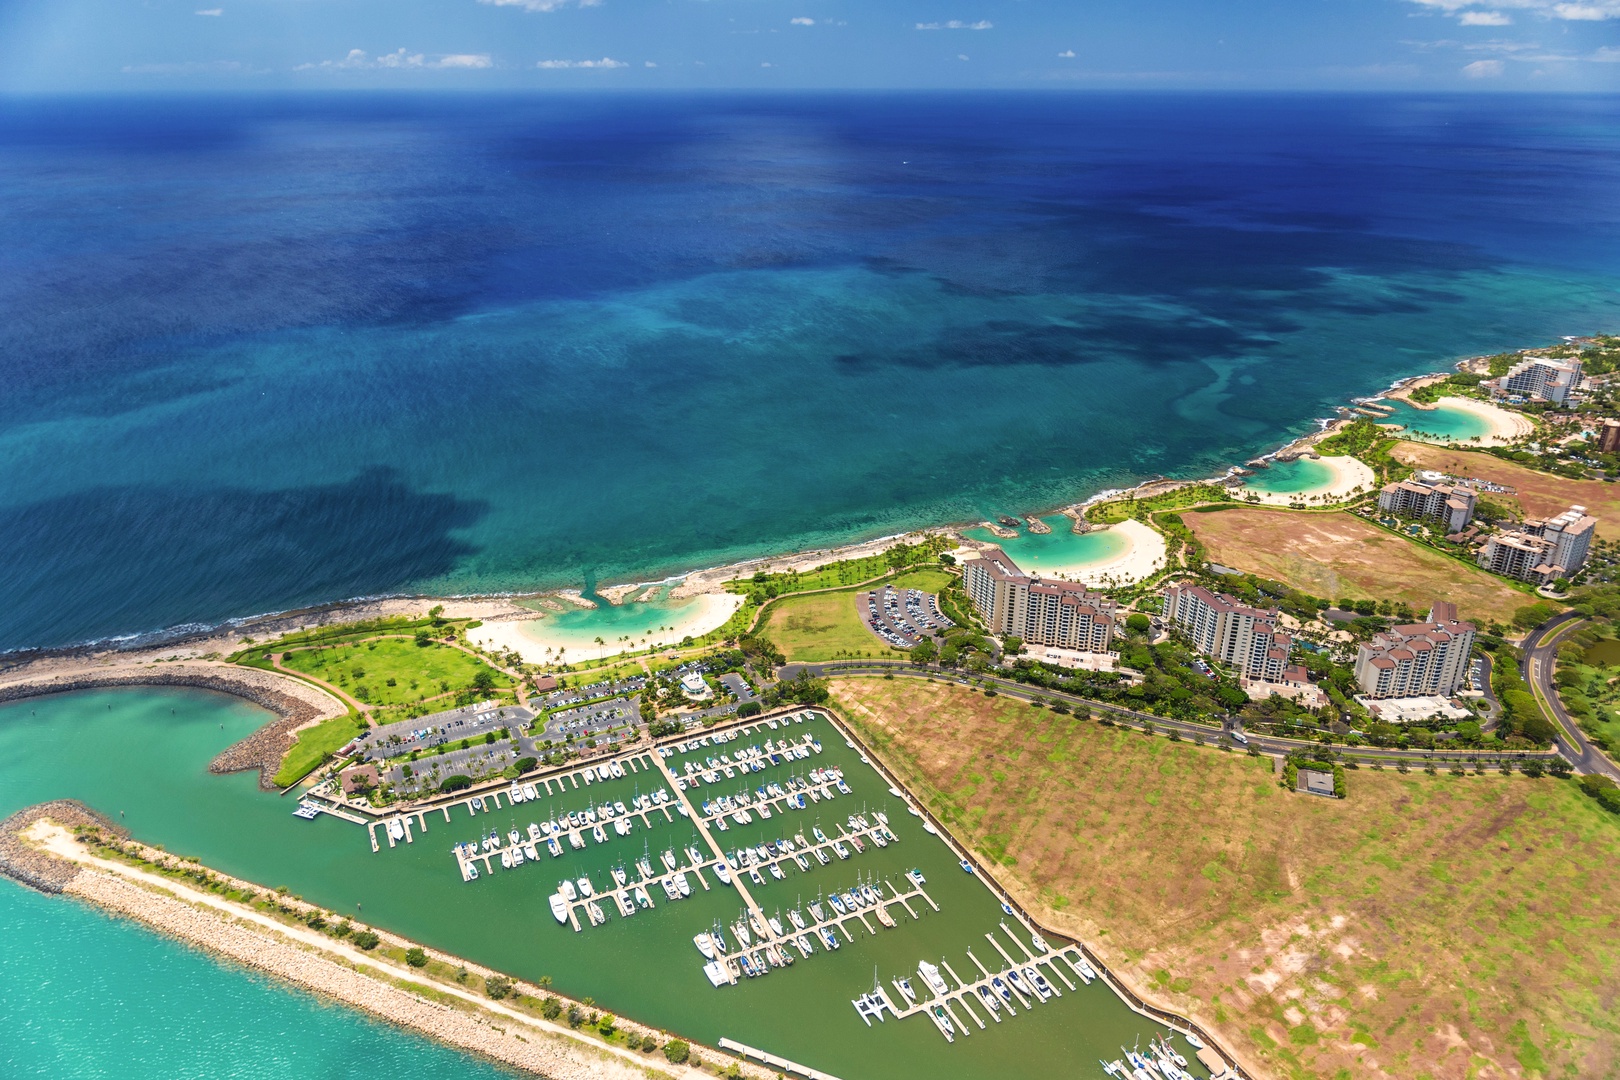 Kapolei Vacation Rentals, Kai Lani 20C - Aerial view of the marina and resort area with stunning ocean views.